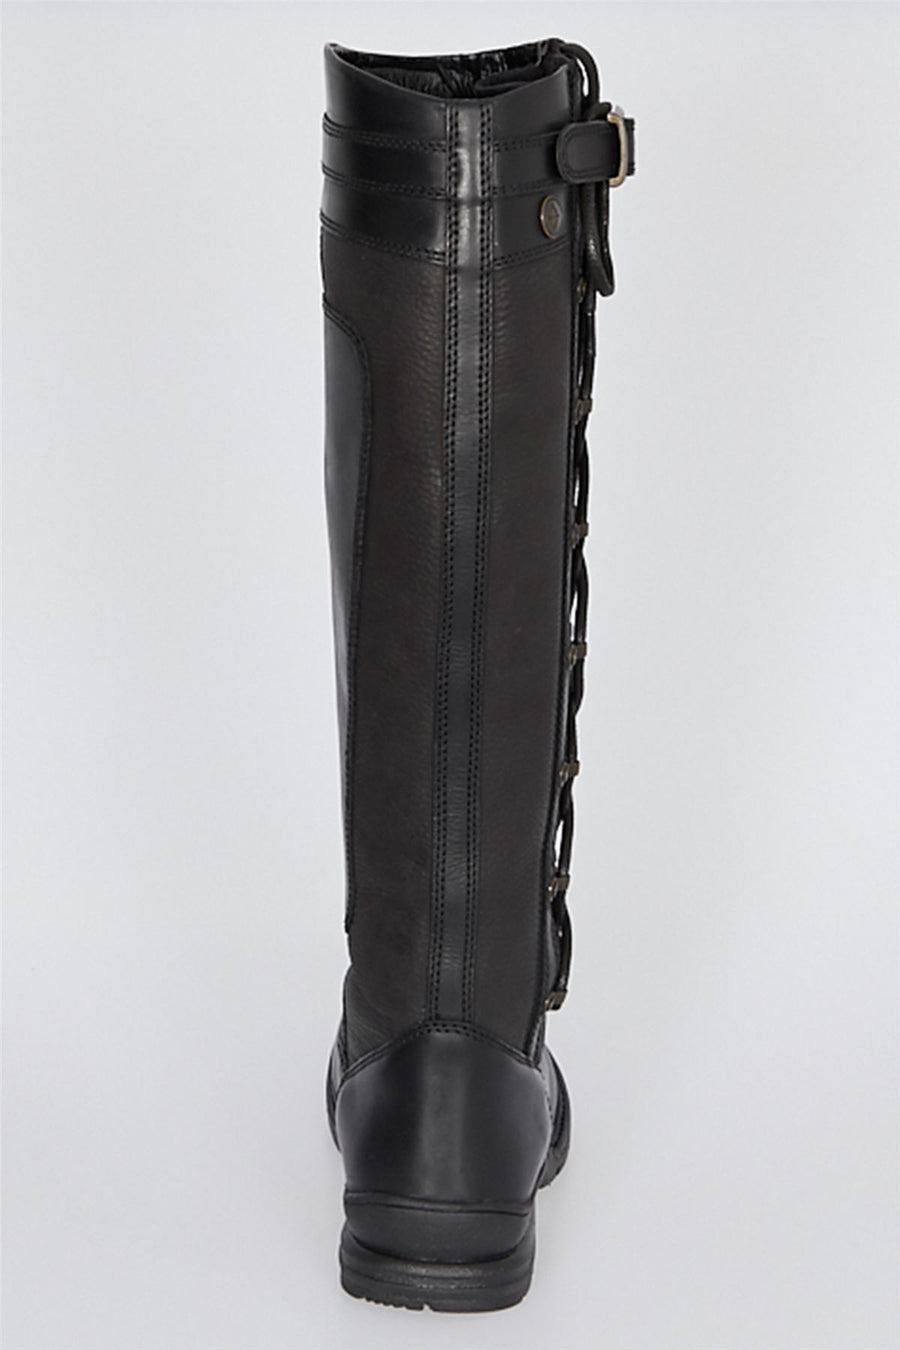 Bow & Arrow Kingston Country Boots BLACK